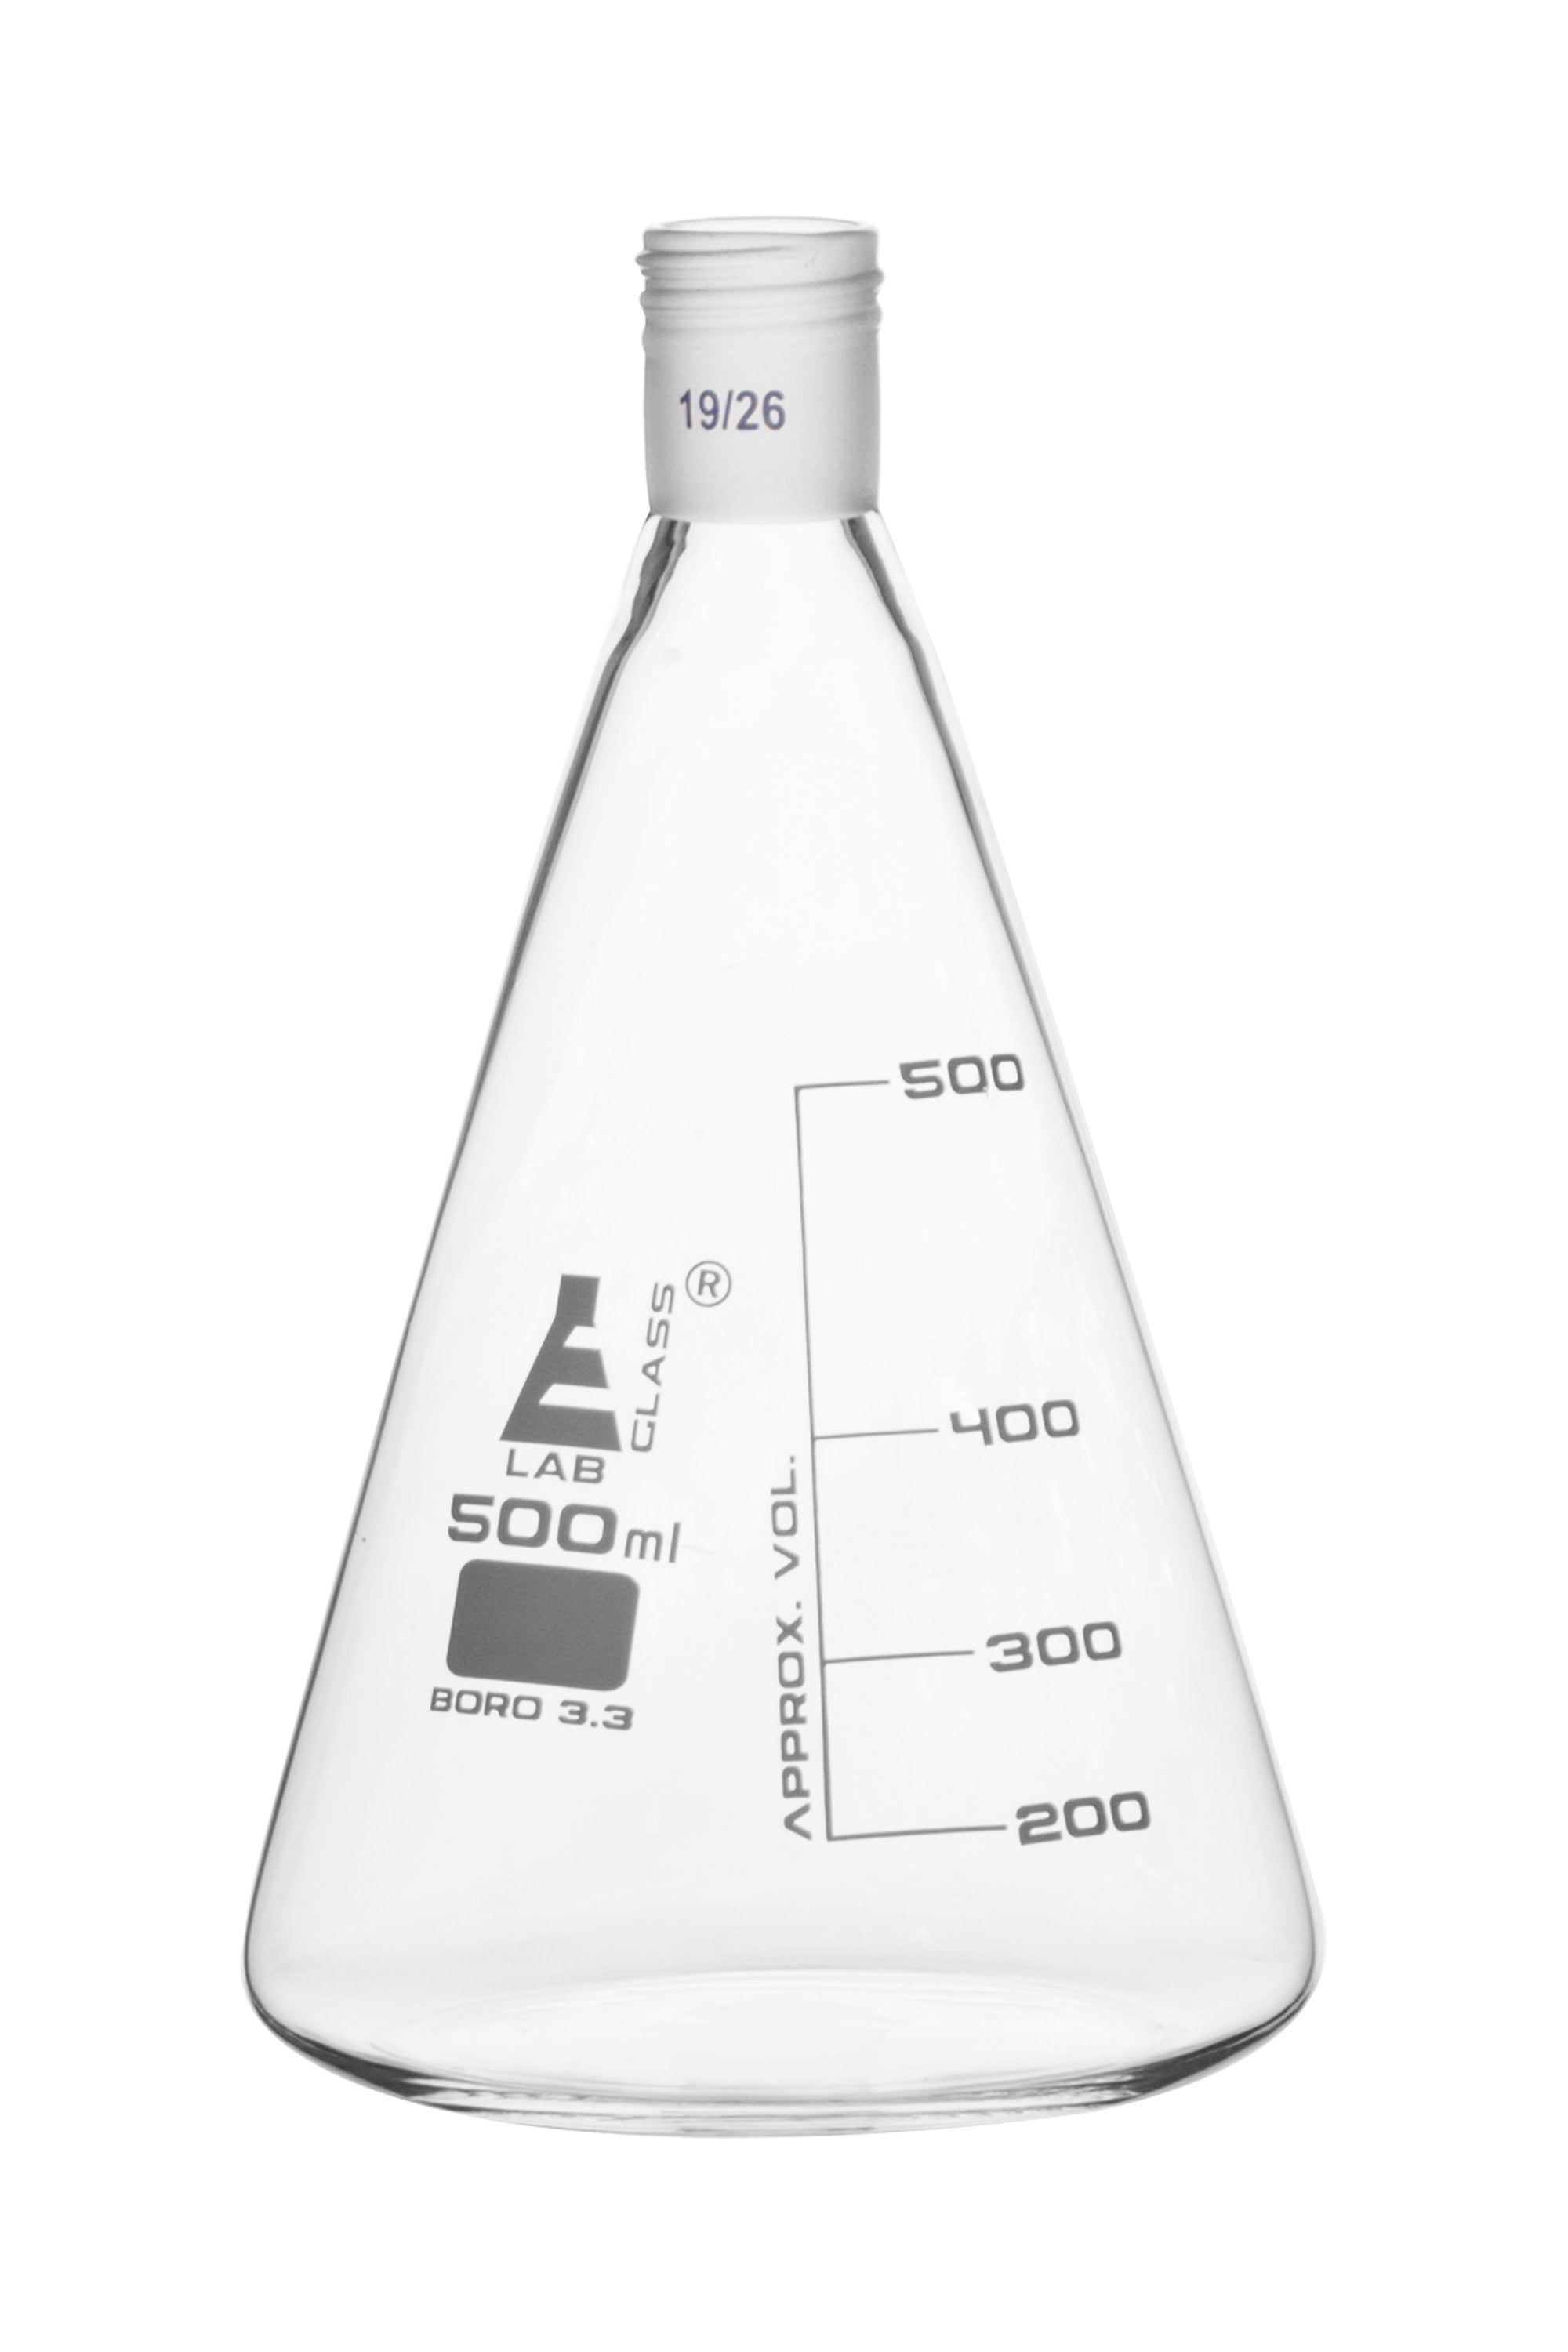 Borosilicate Glass Erlenmeyer Flask with 19/26 Screw Thread Neck Joint, 500 ml, 100 ml Graduations, Autoclavable